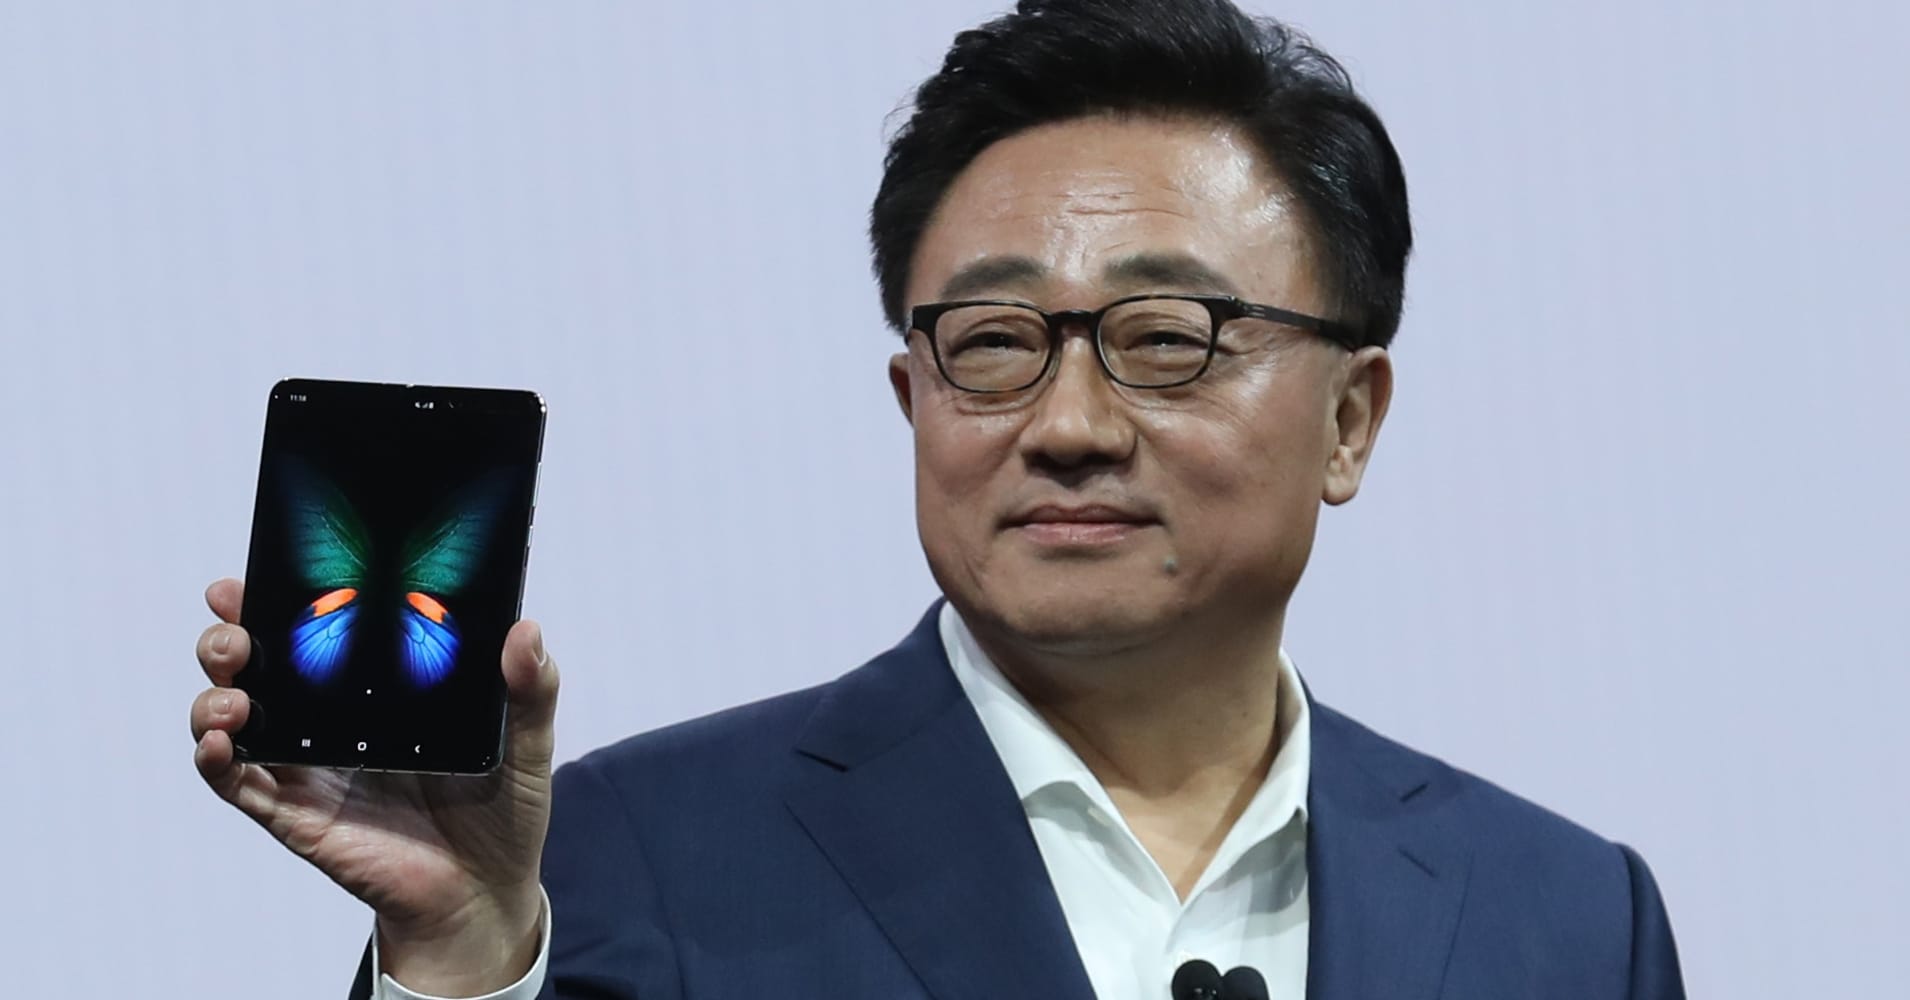 Samsung's foldable smartphone is a 'game-changer' — but it won't be a profit-maker yet, analyst says